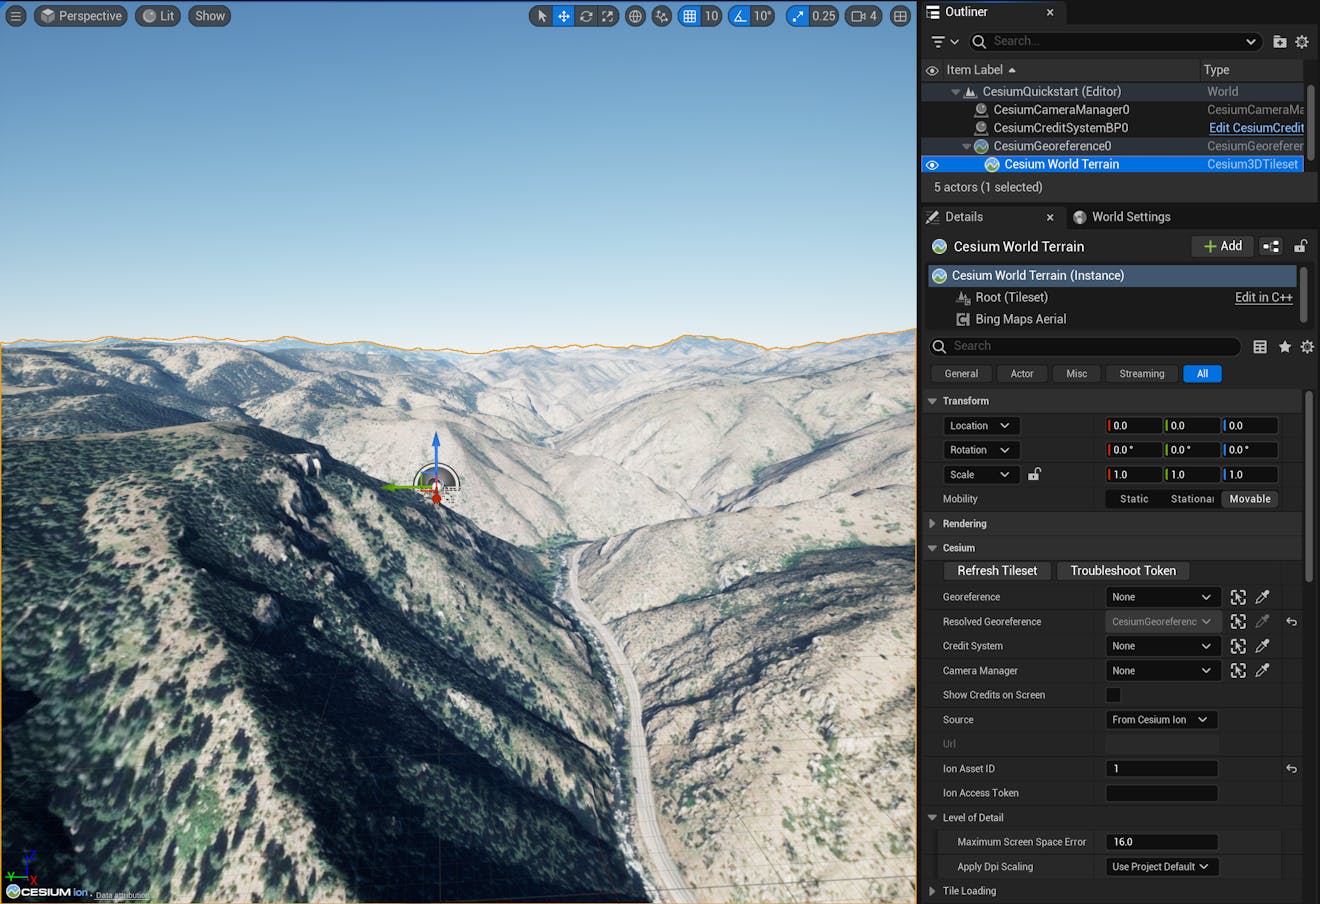 A screenshot showing the settings on a Cesium3DTileset.